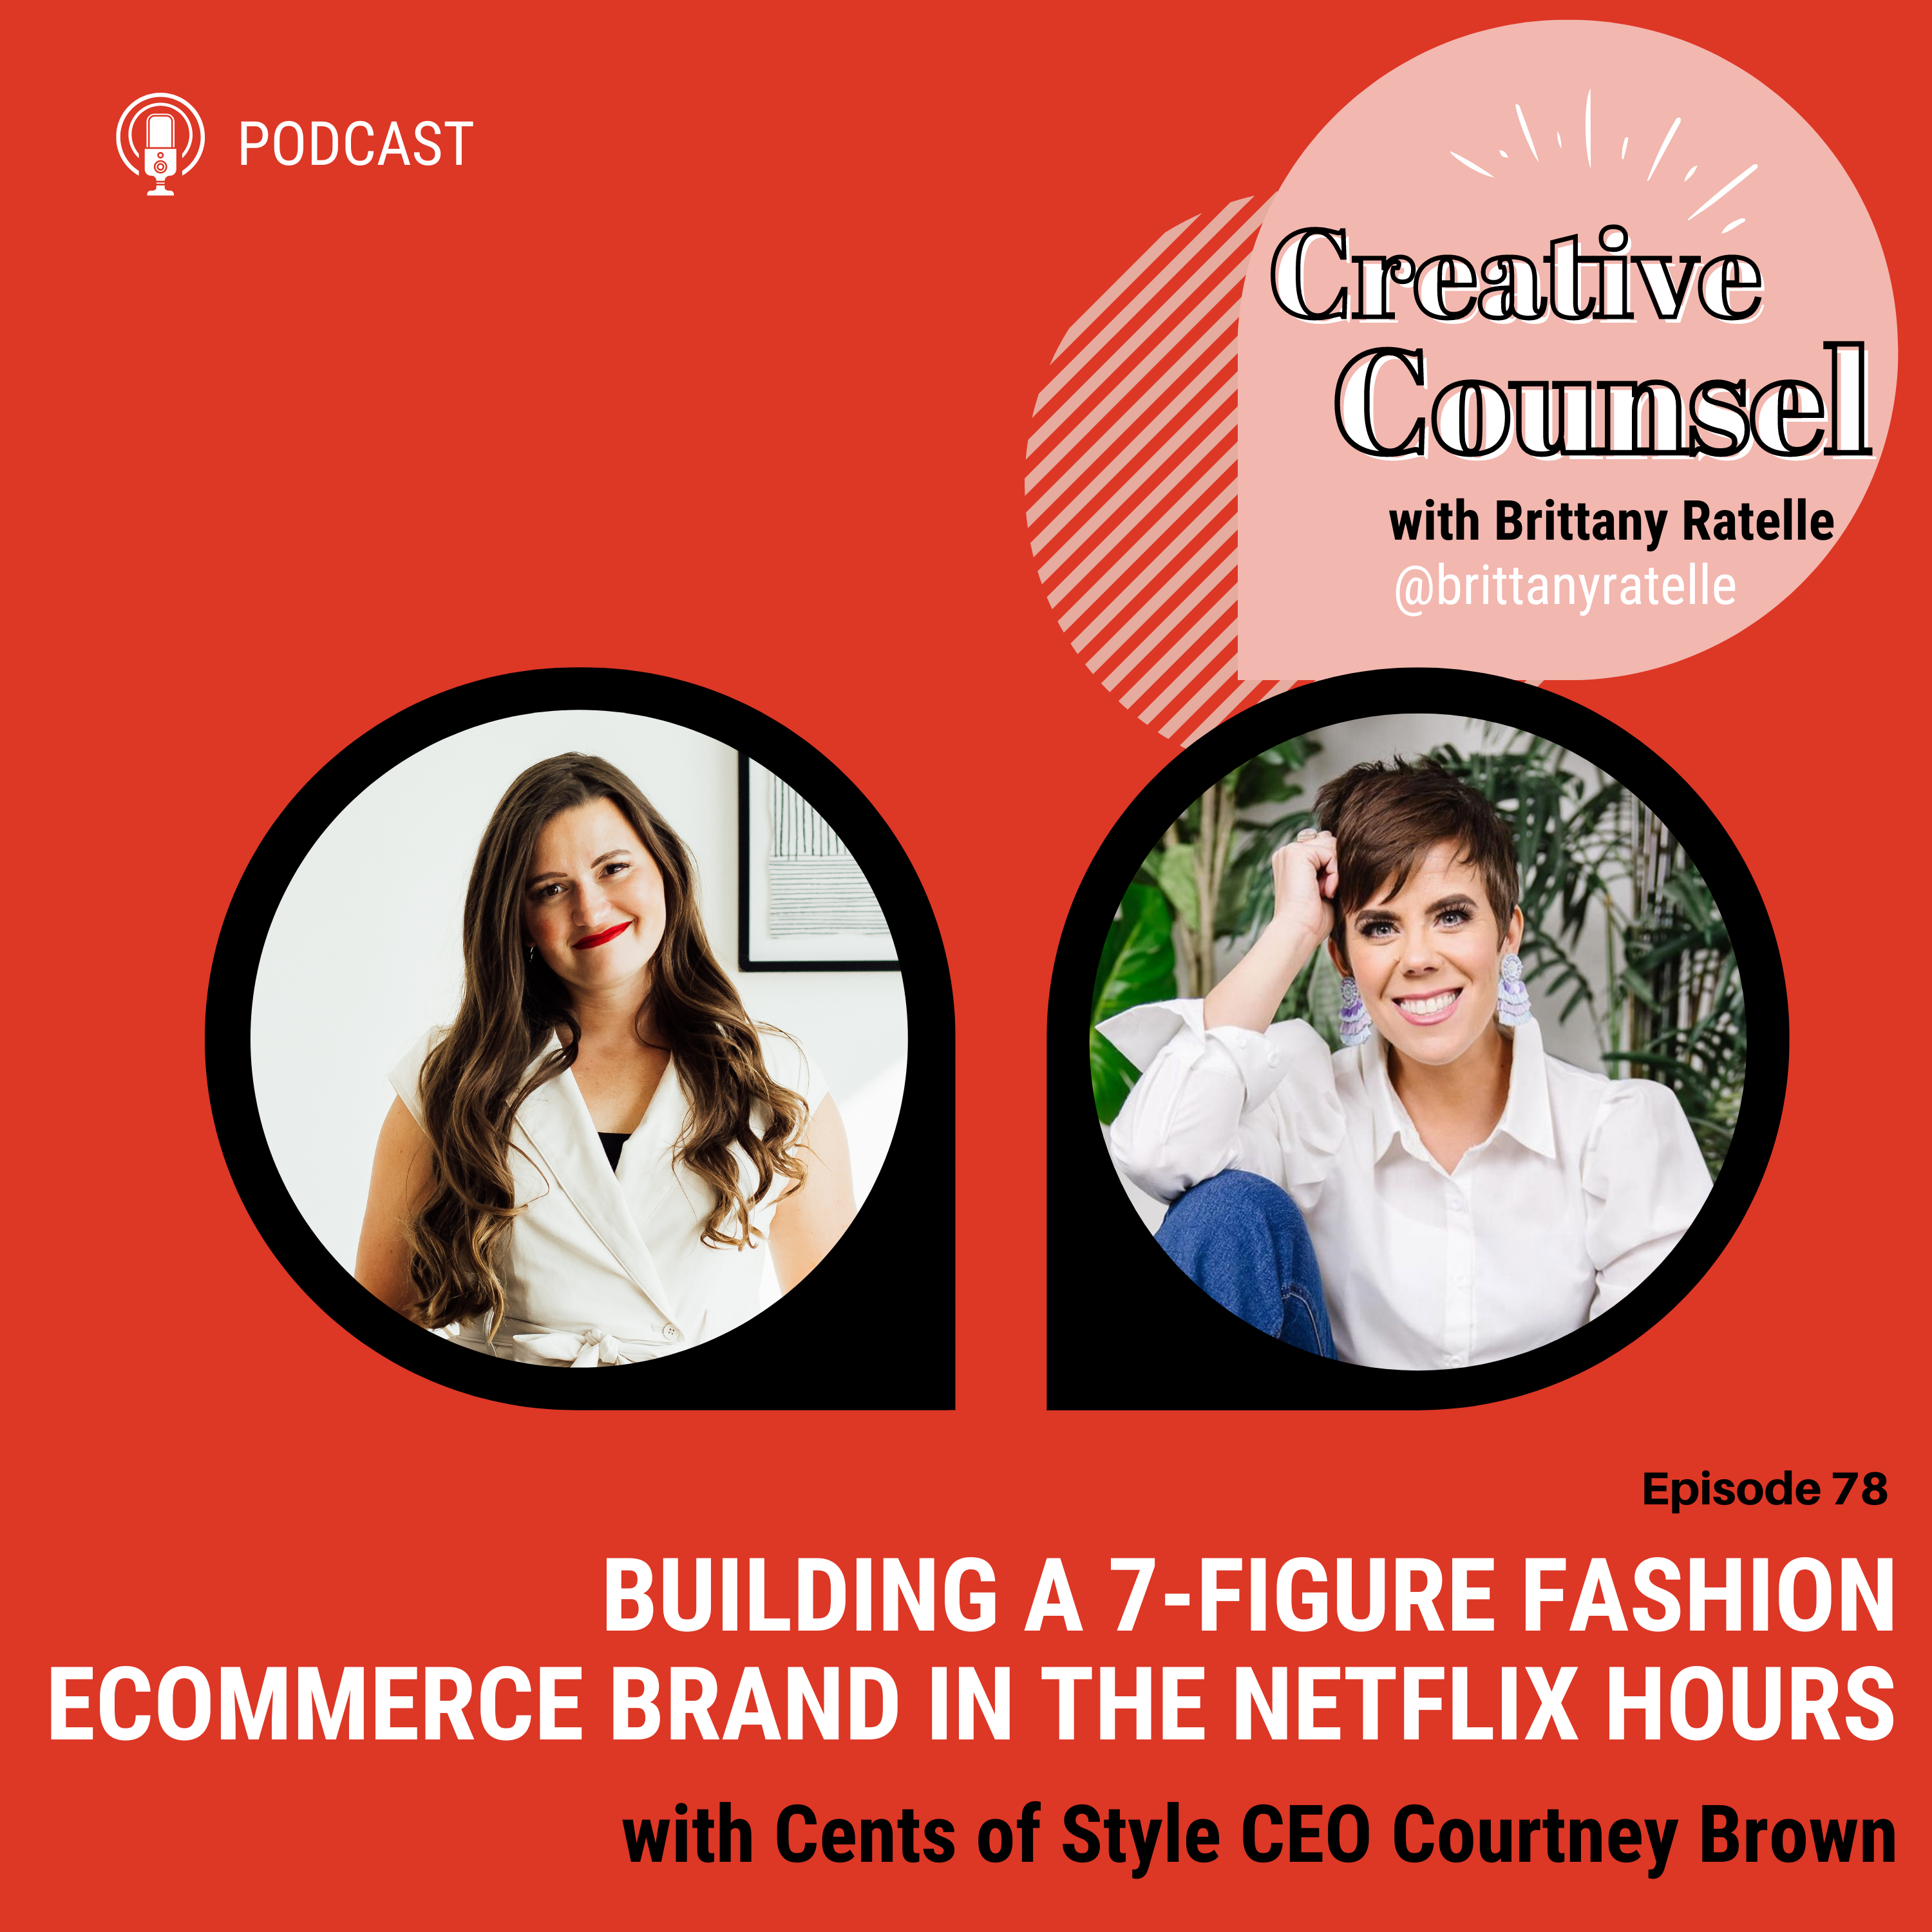 Building a 7-figure Fashion eCommerce Brand in the Netflix Hours with Cents of Style CEO Courtney Brown | Creative Counsel Podcast with Attorney Brittany Ratelle